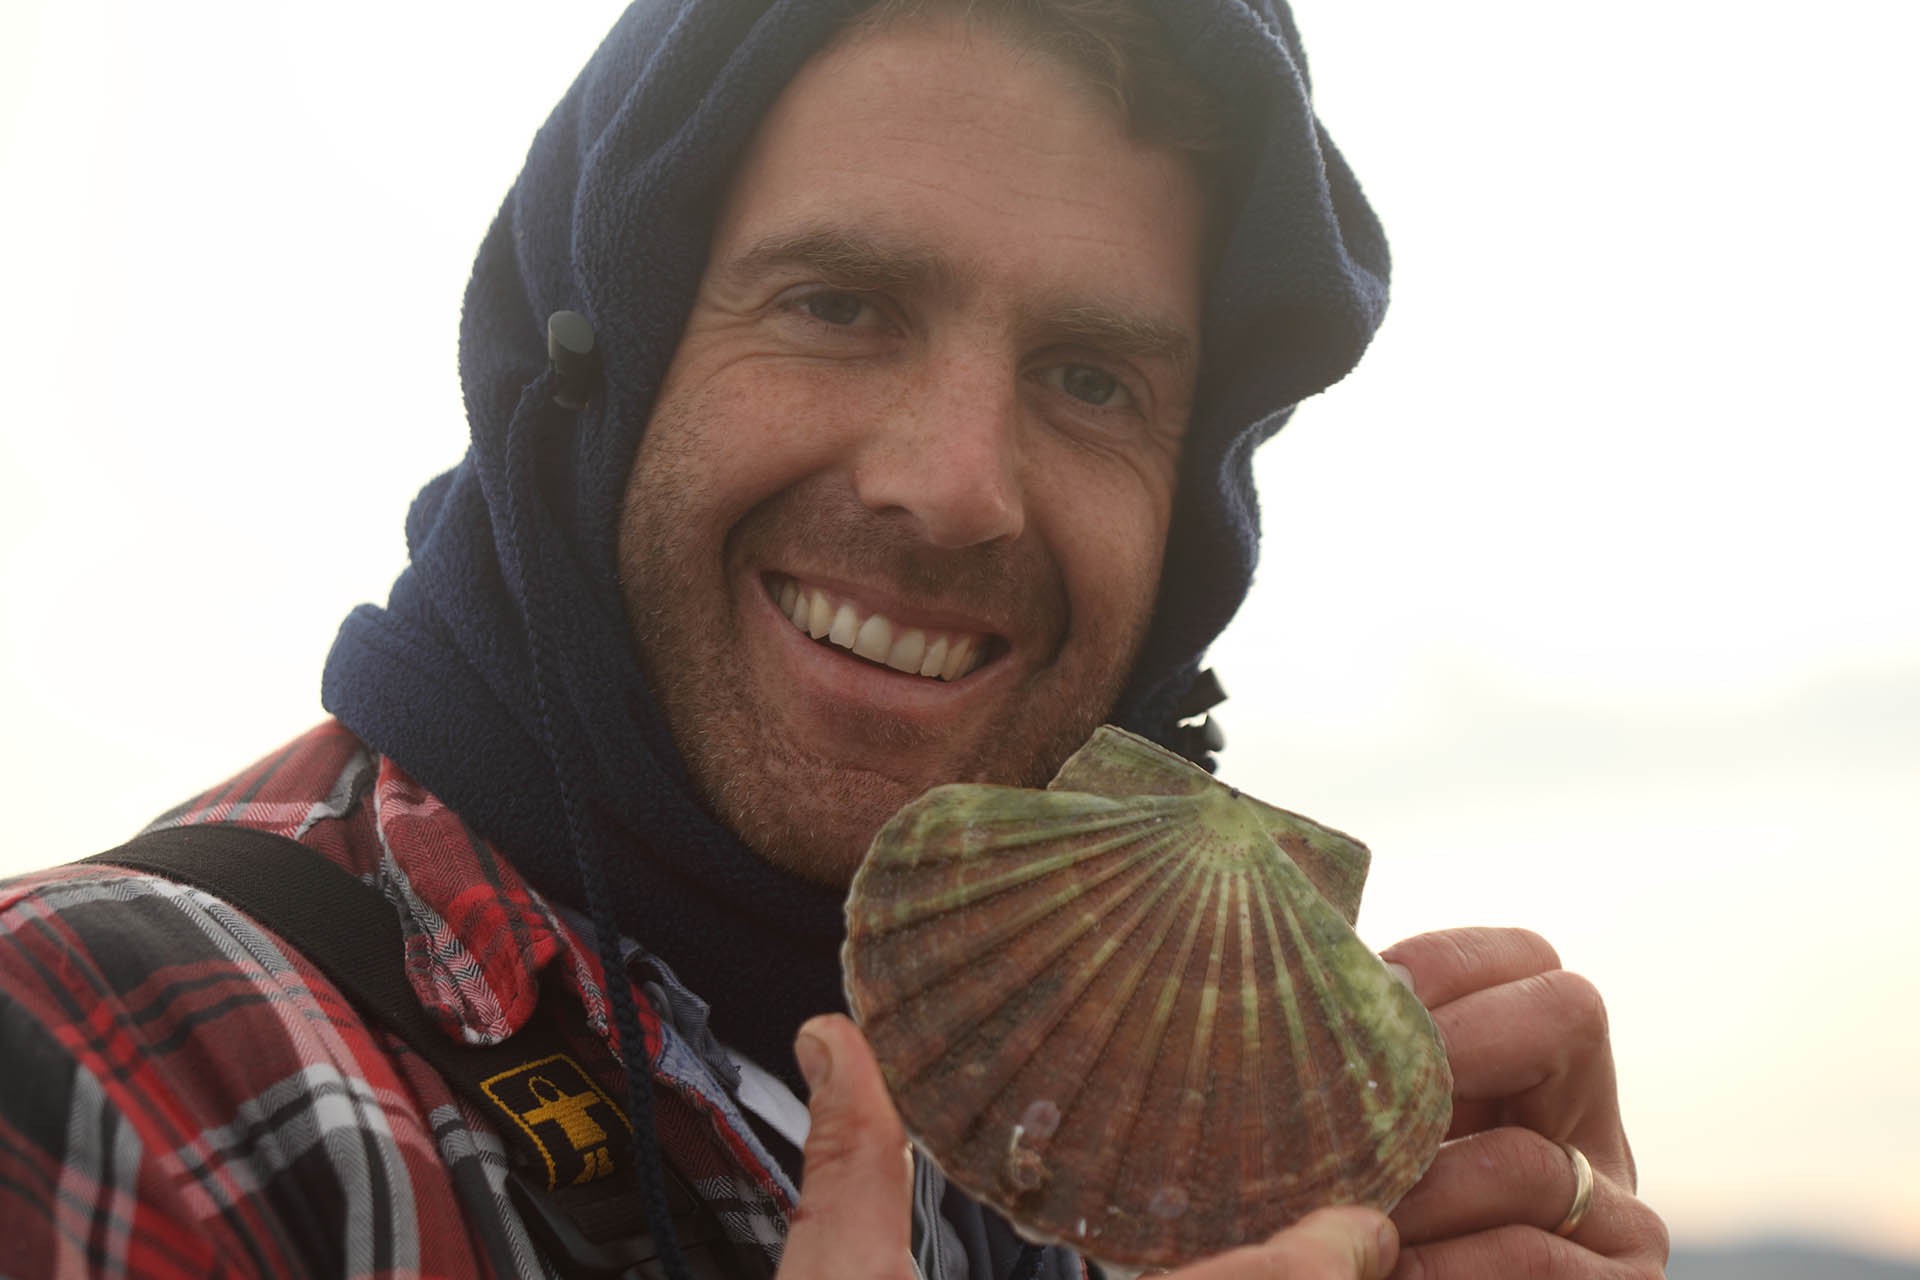 THE SCALLOP DIARIES